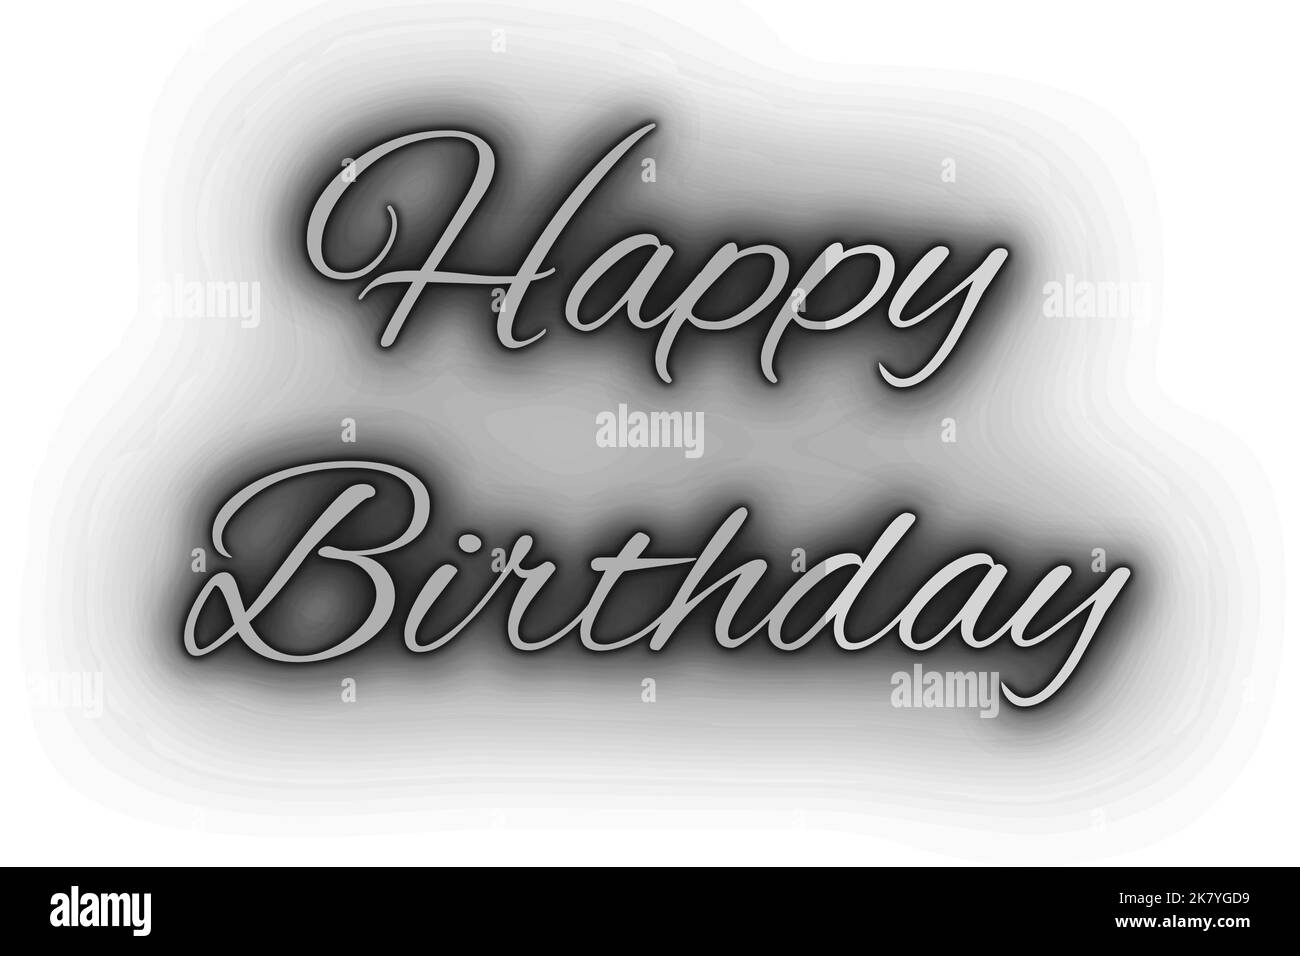 Birthday card Black and White Stock Photos & Images - Alamy